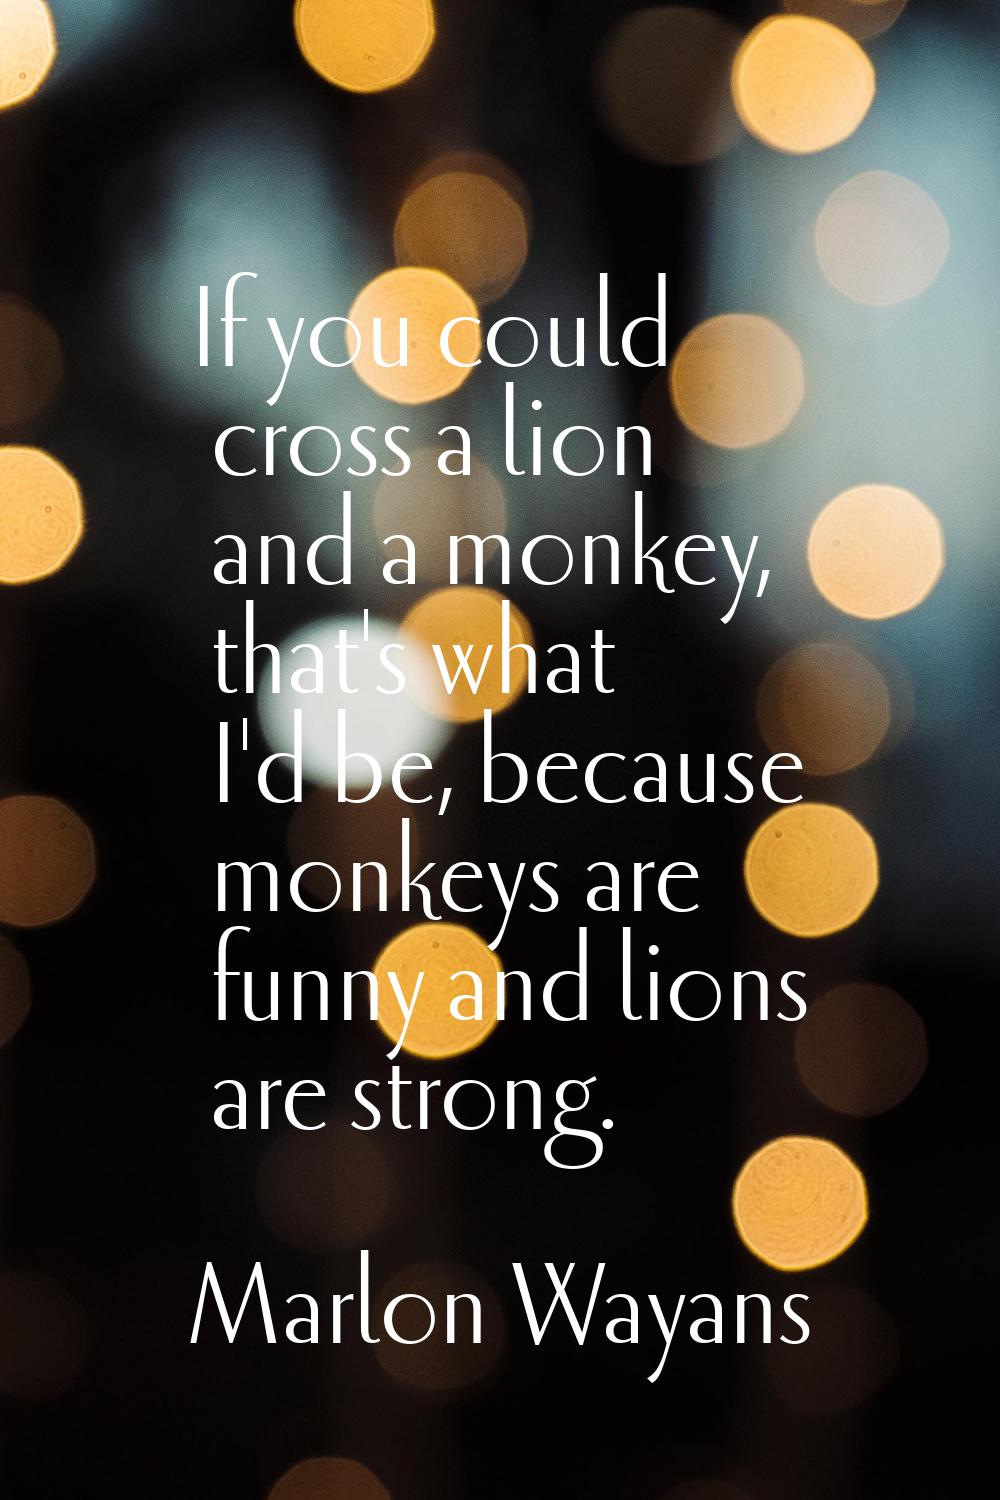 If you could cross a lion and a monkey, that's what I'd be, because monkeys are funny and lions are